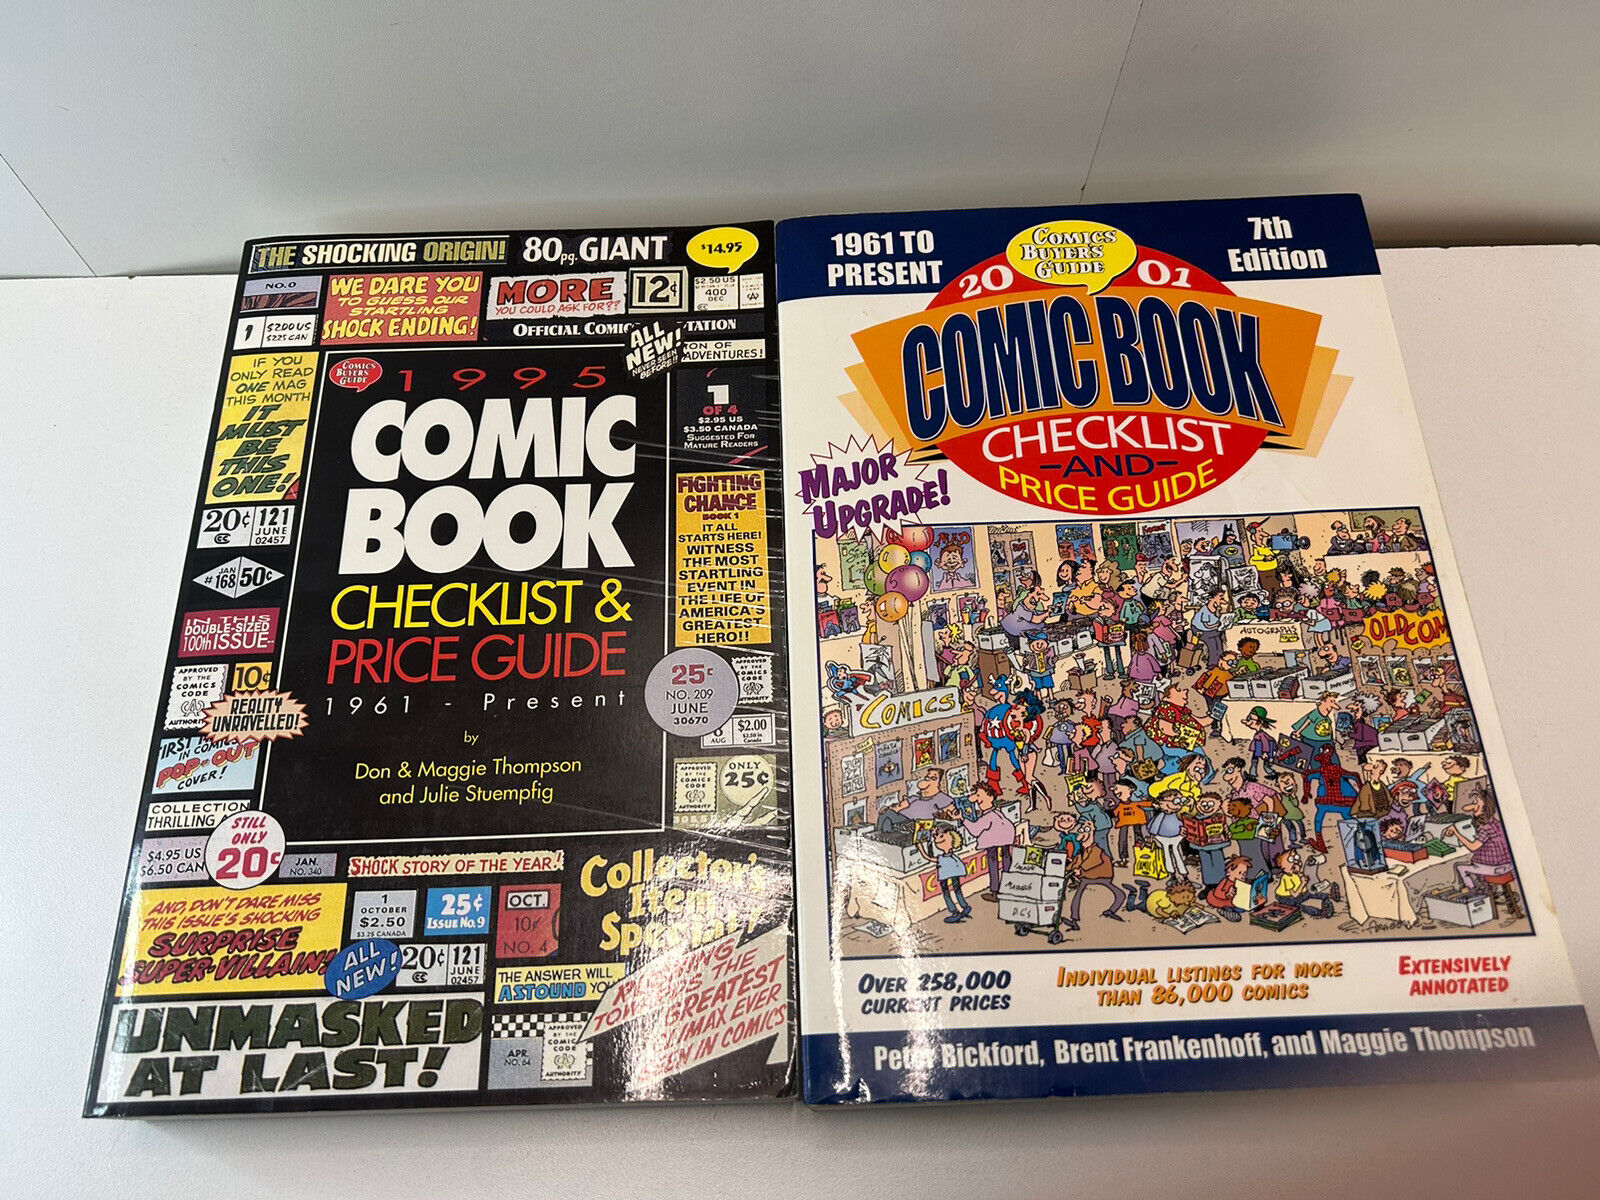 Comics Buyer\'s Guide Comic Book Checklist And Price Guide #2001 1995 Lot 2